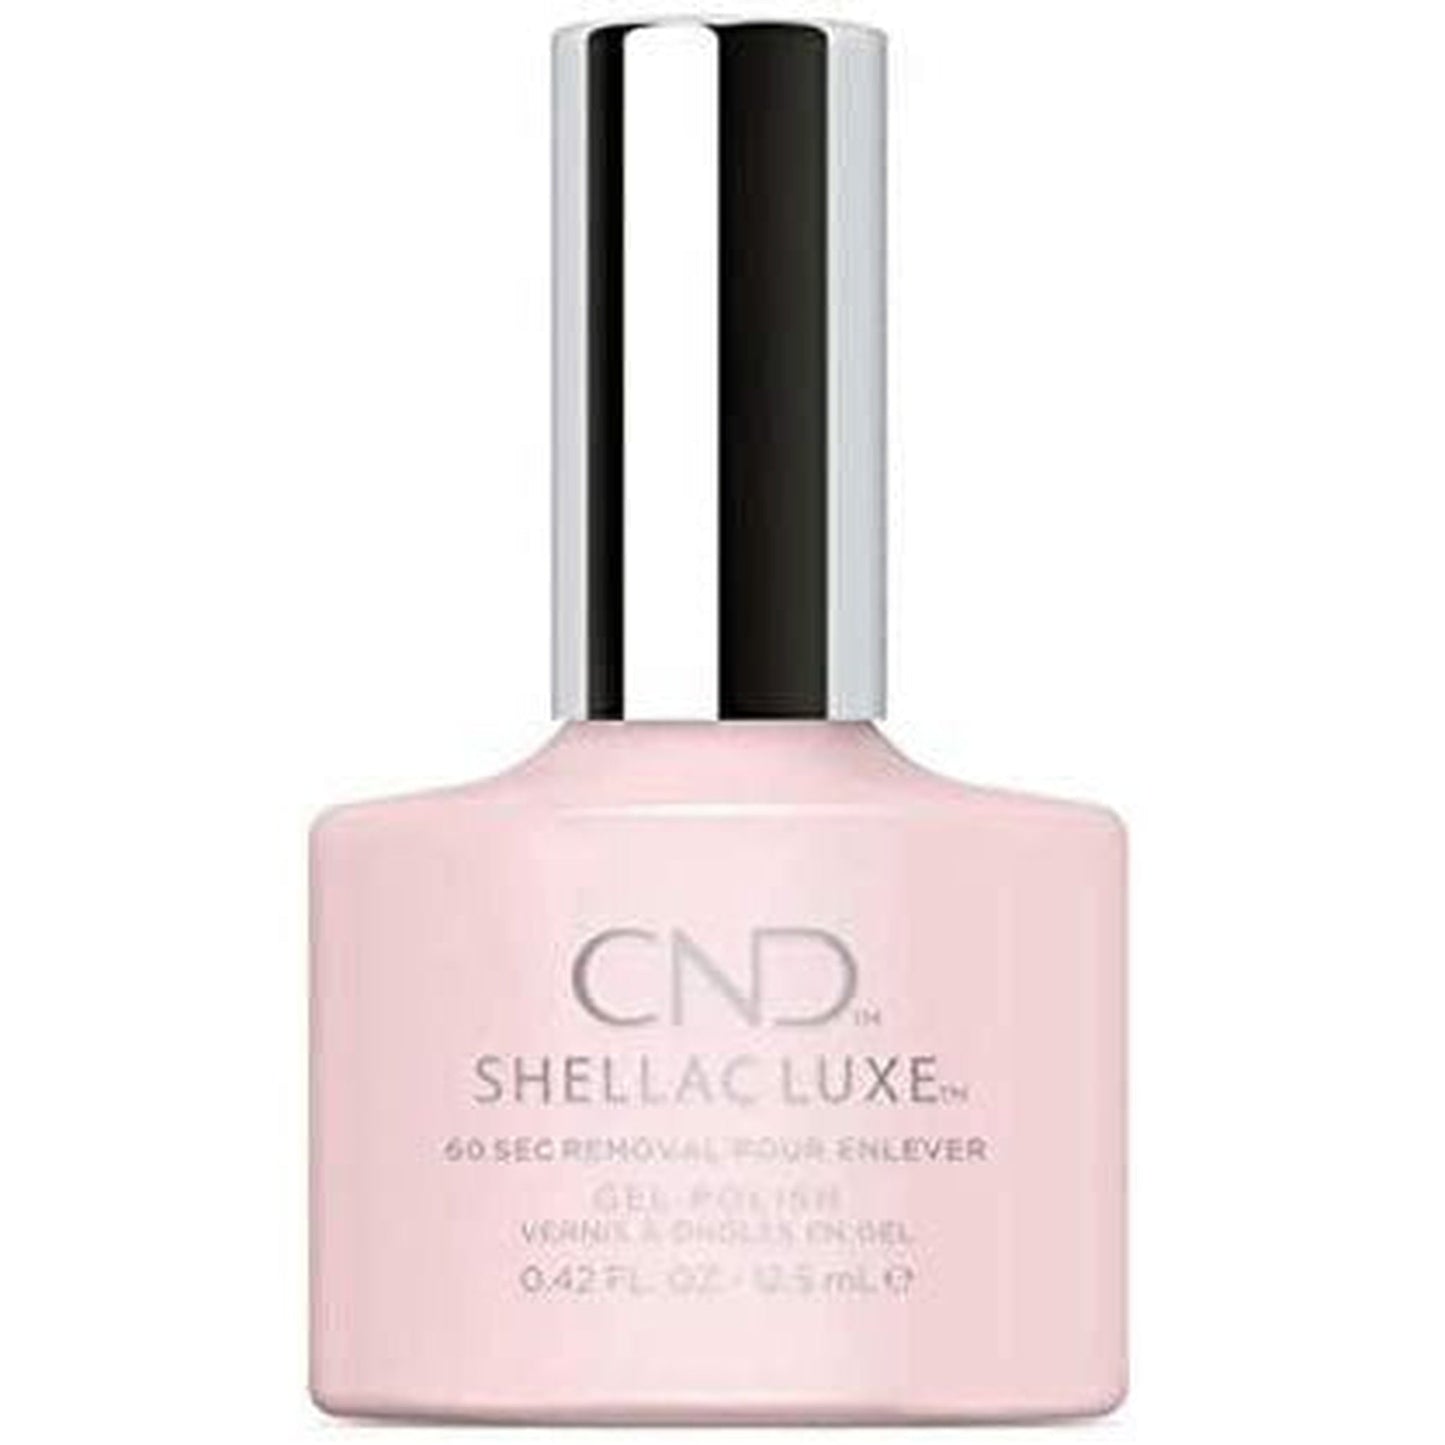 CND Shellac Luxe Gel Polish NEGLIGEE #132-CND-BeautyNmakeup.co.uk